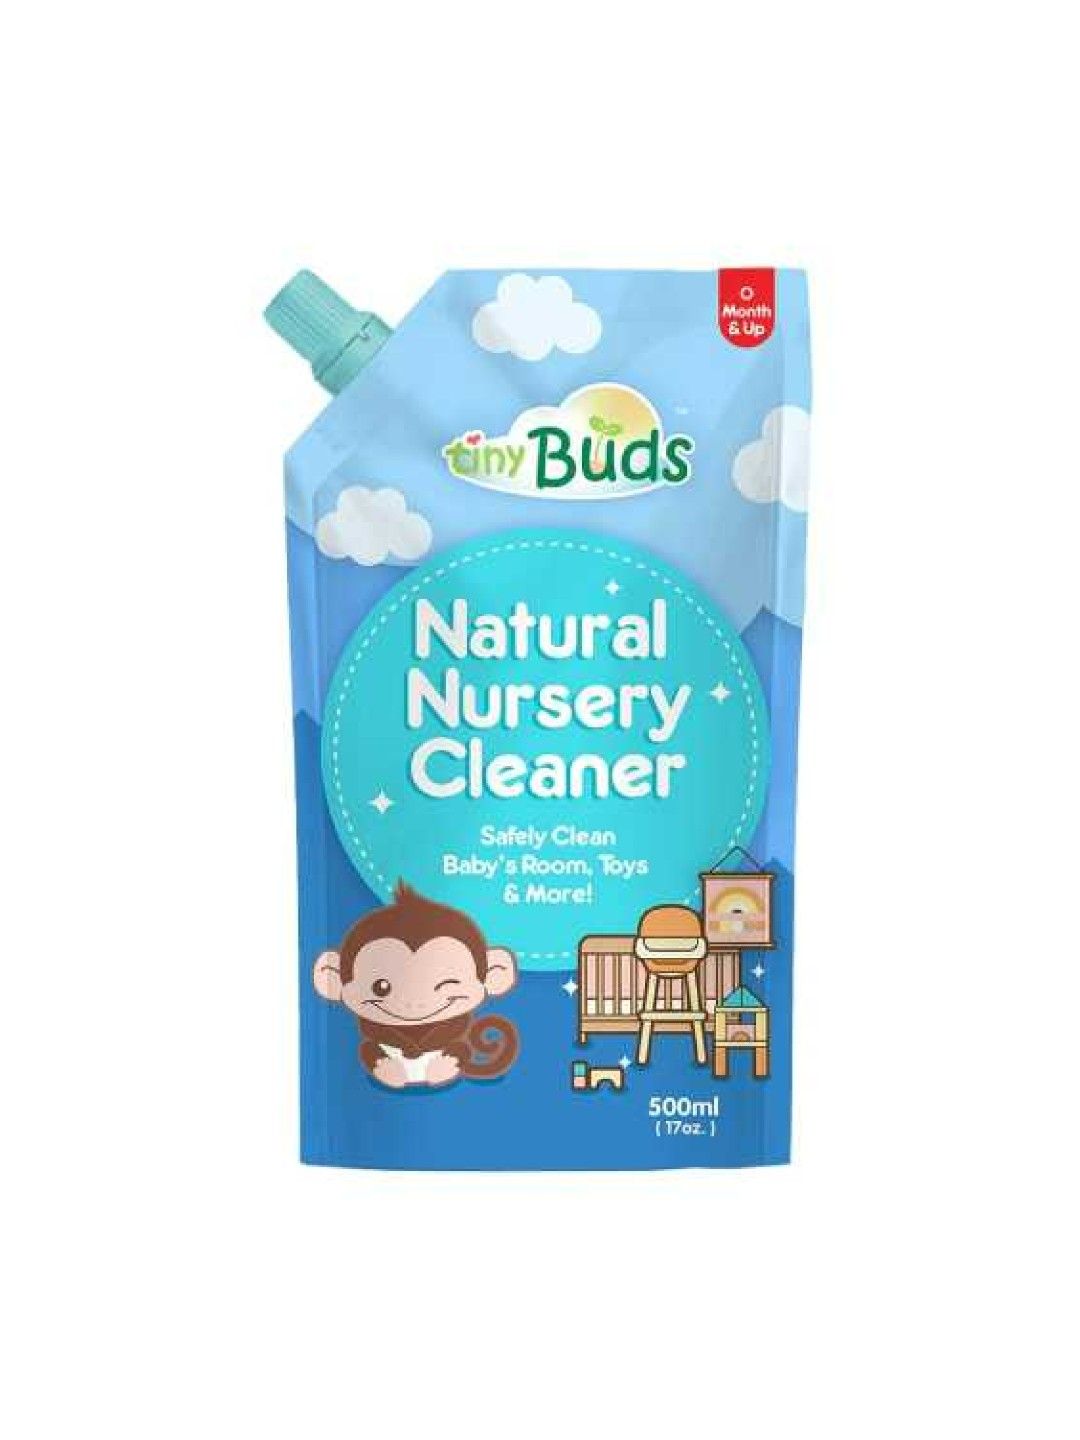 Tiny Buds Natural Nursery Cleaner Pouch (500ml)